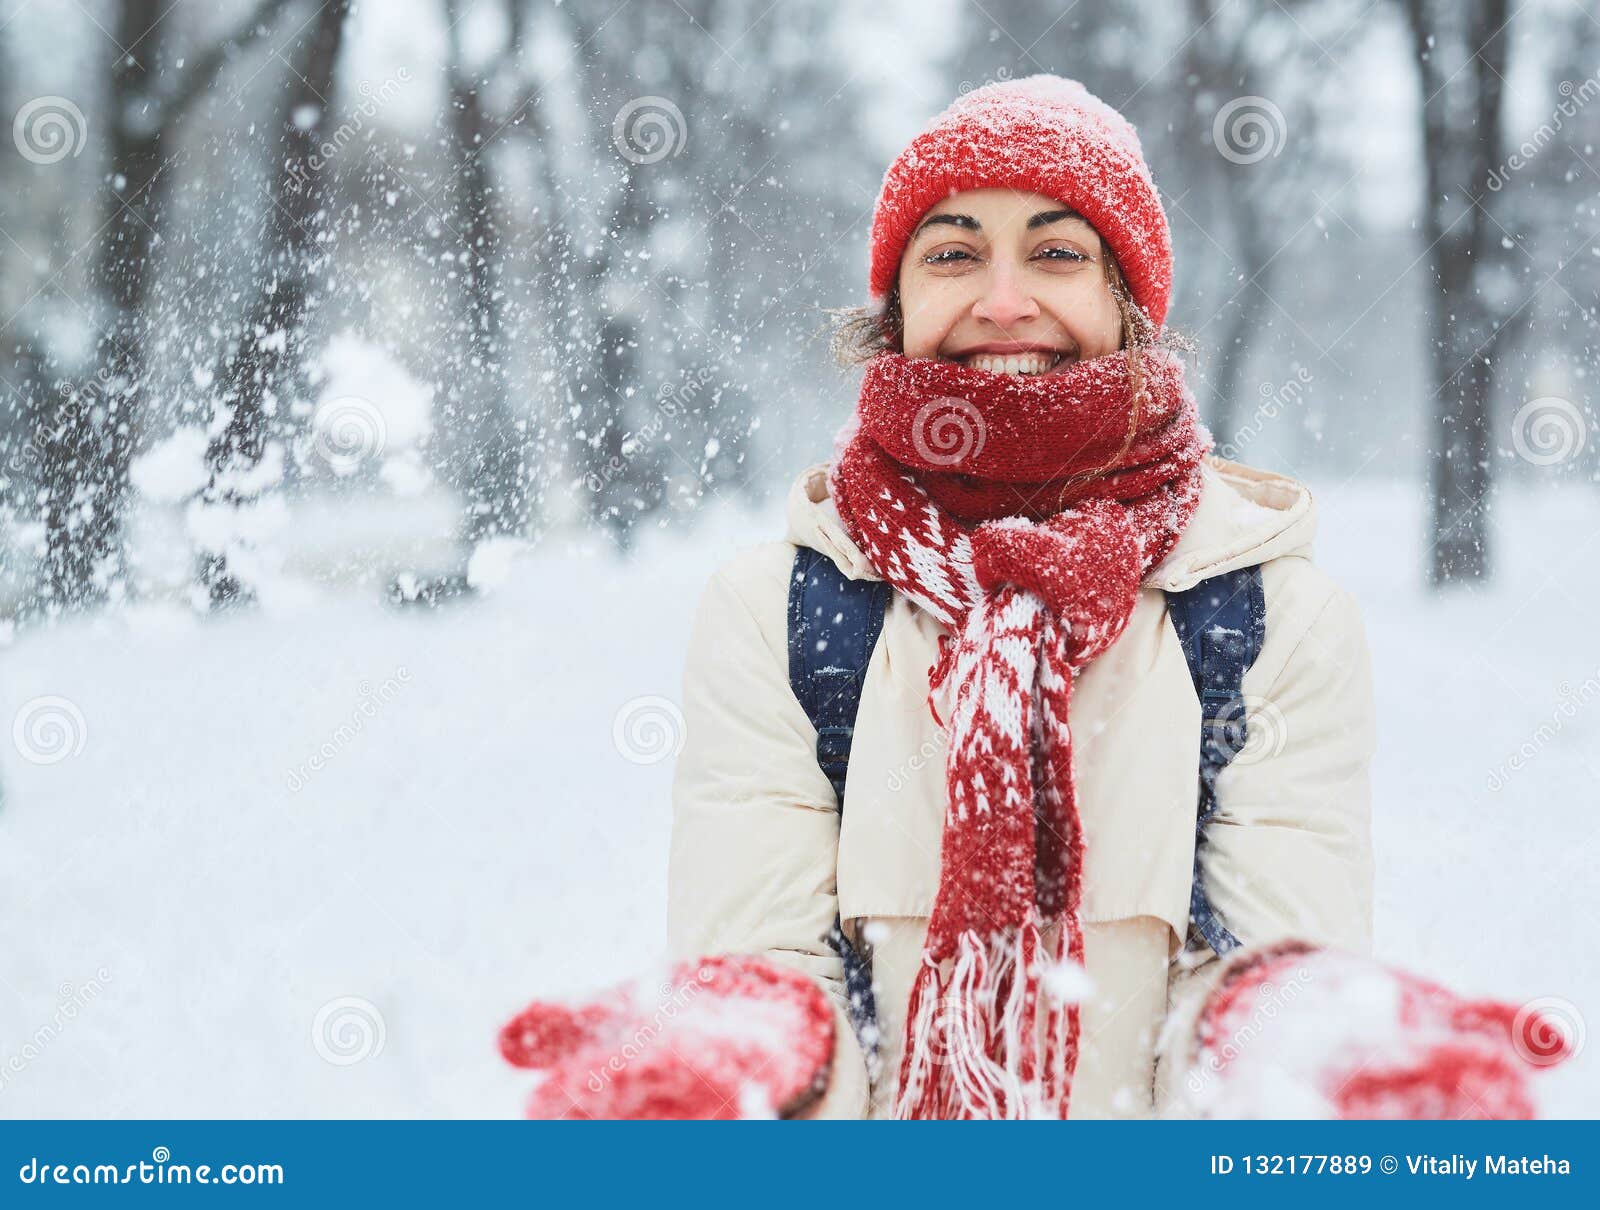 Cheerful Smiling Woman in White Down Jacket and Red Cap, Scarf and ...